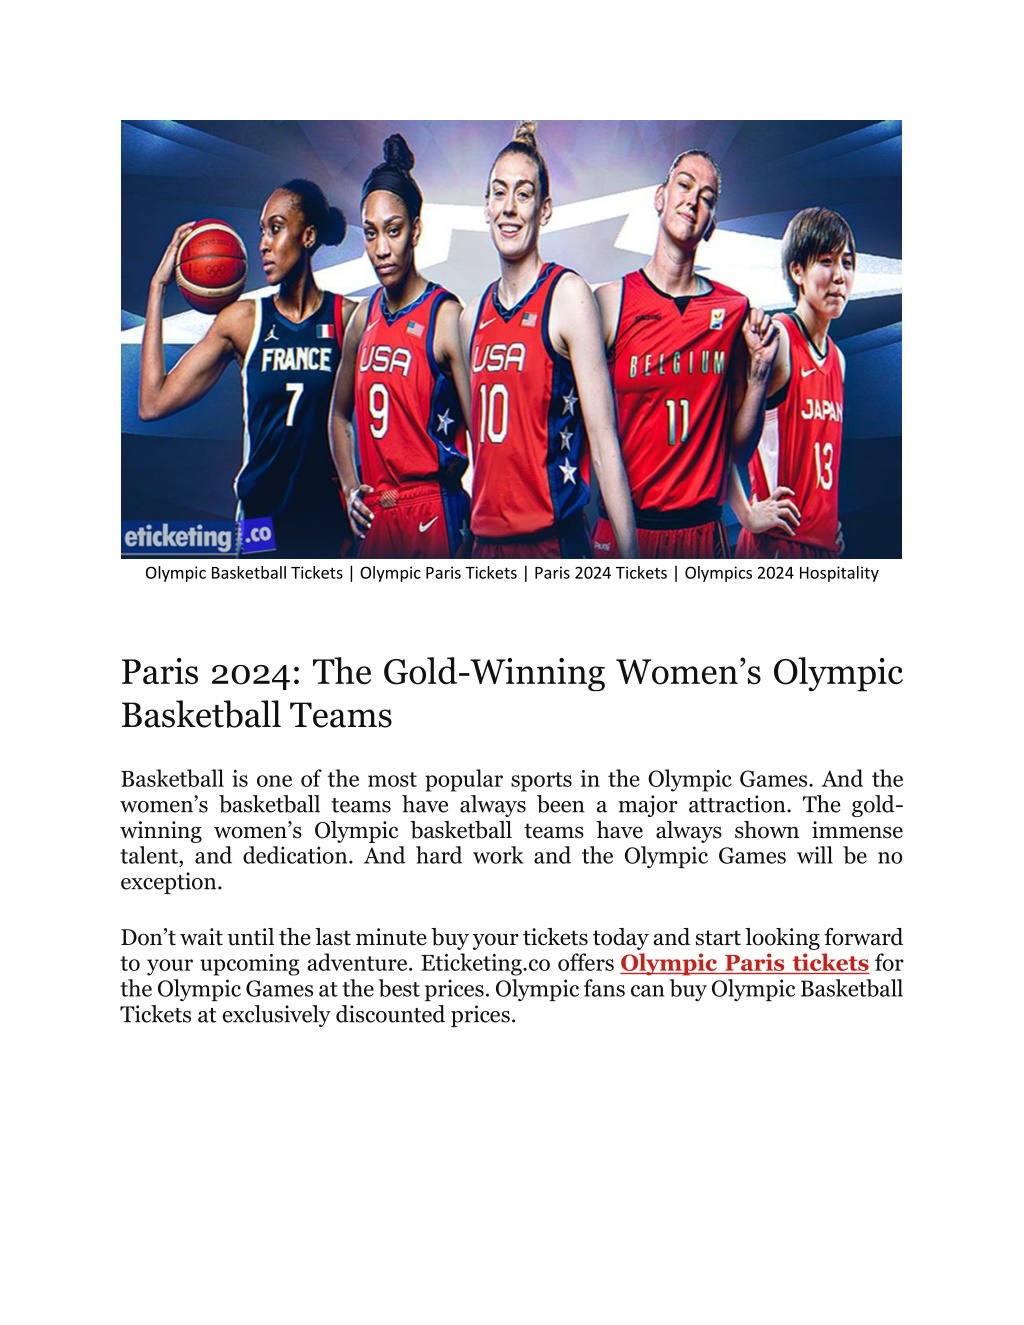 PPT Paris 2024 Olympic Basketball and road to gold medal at Olympic